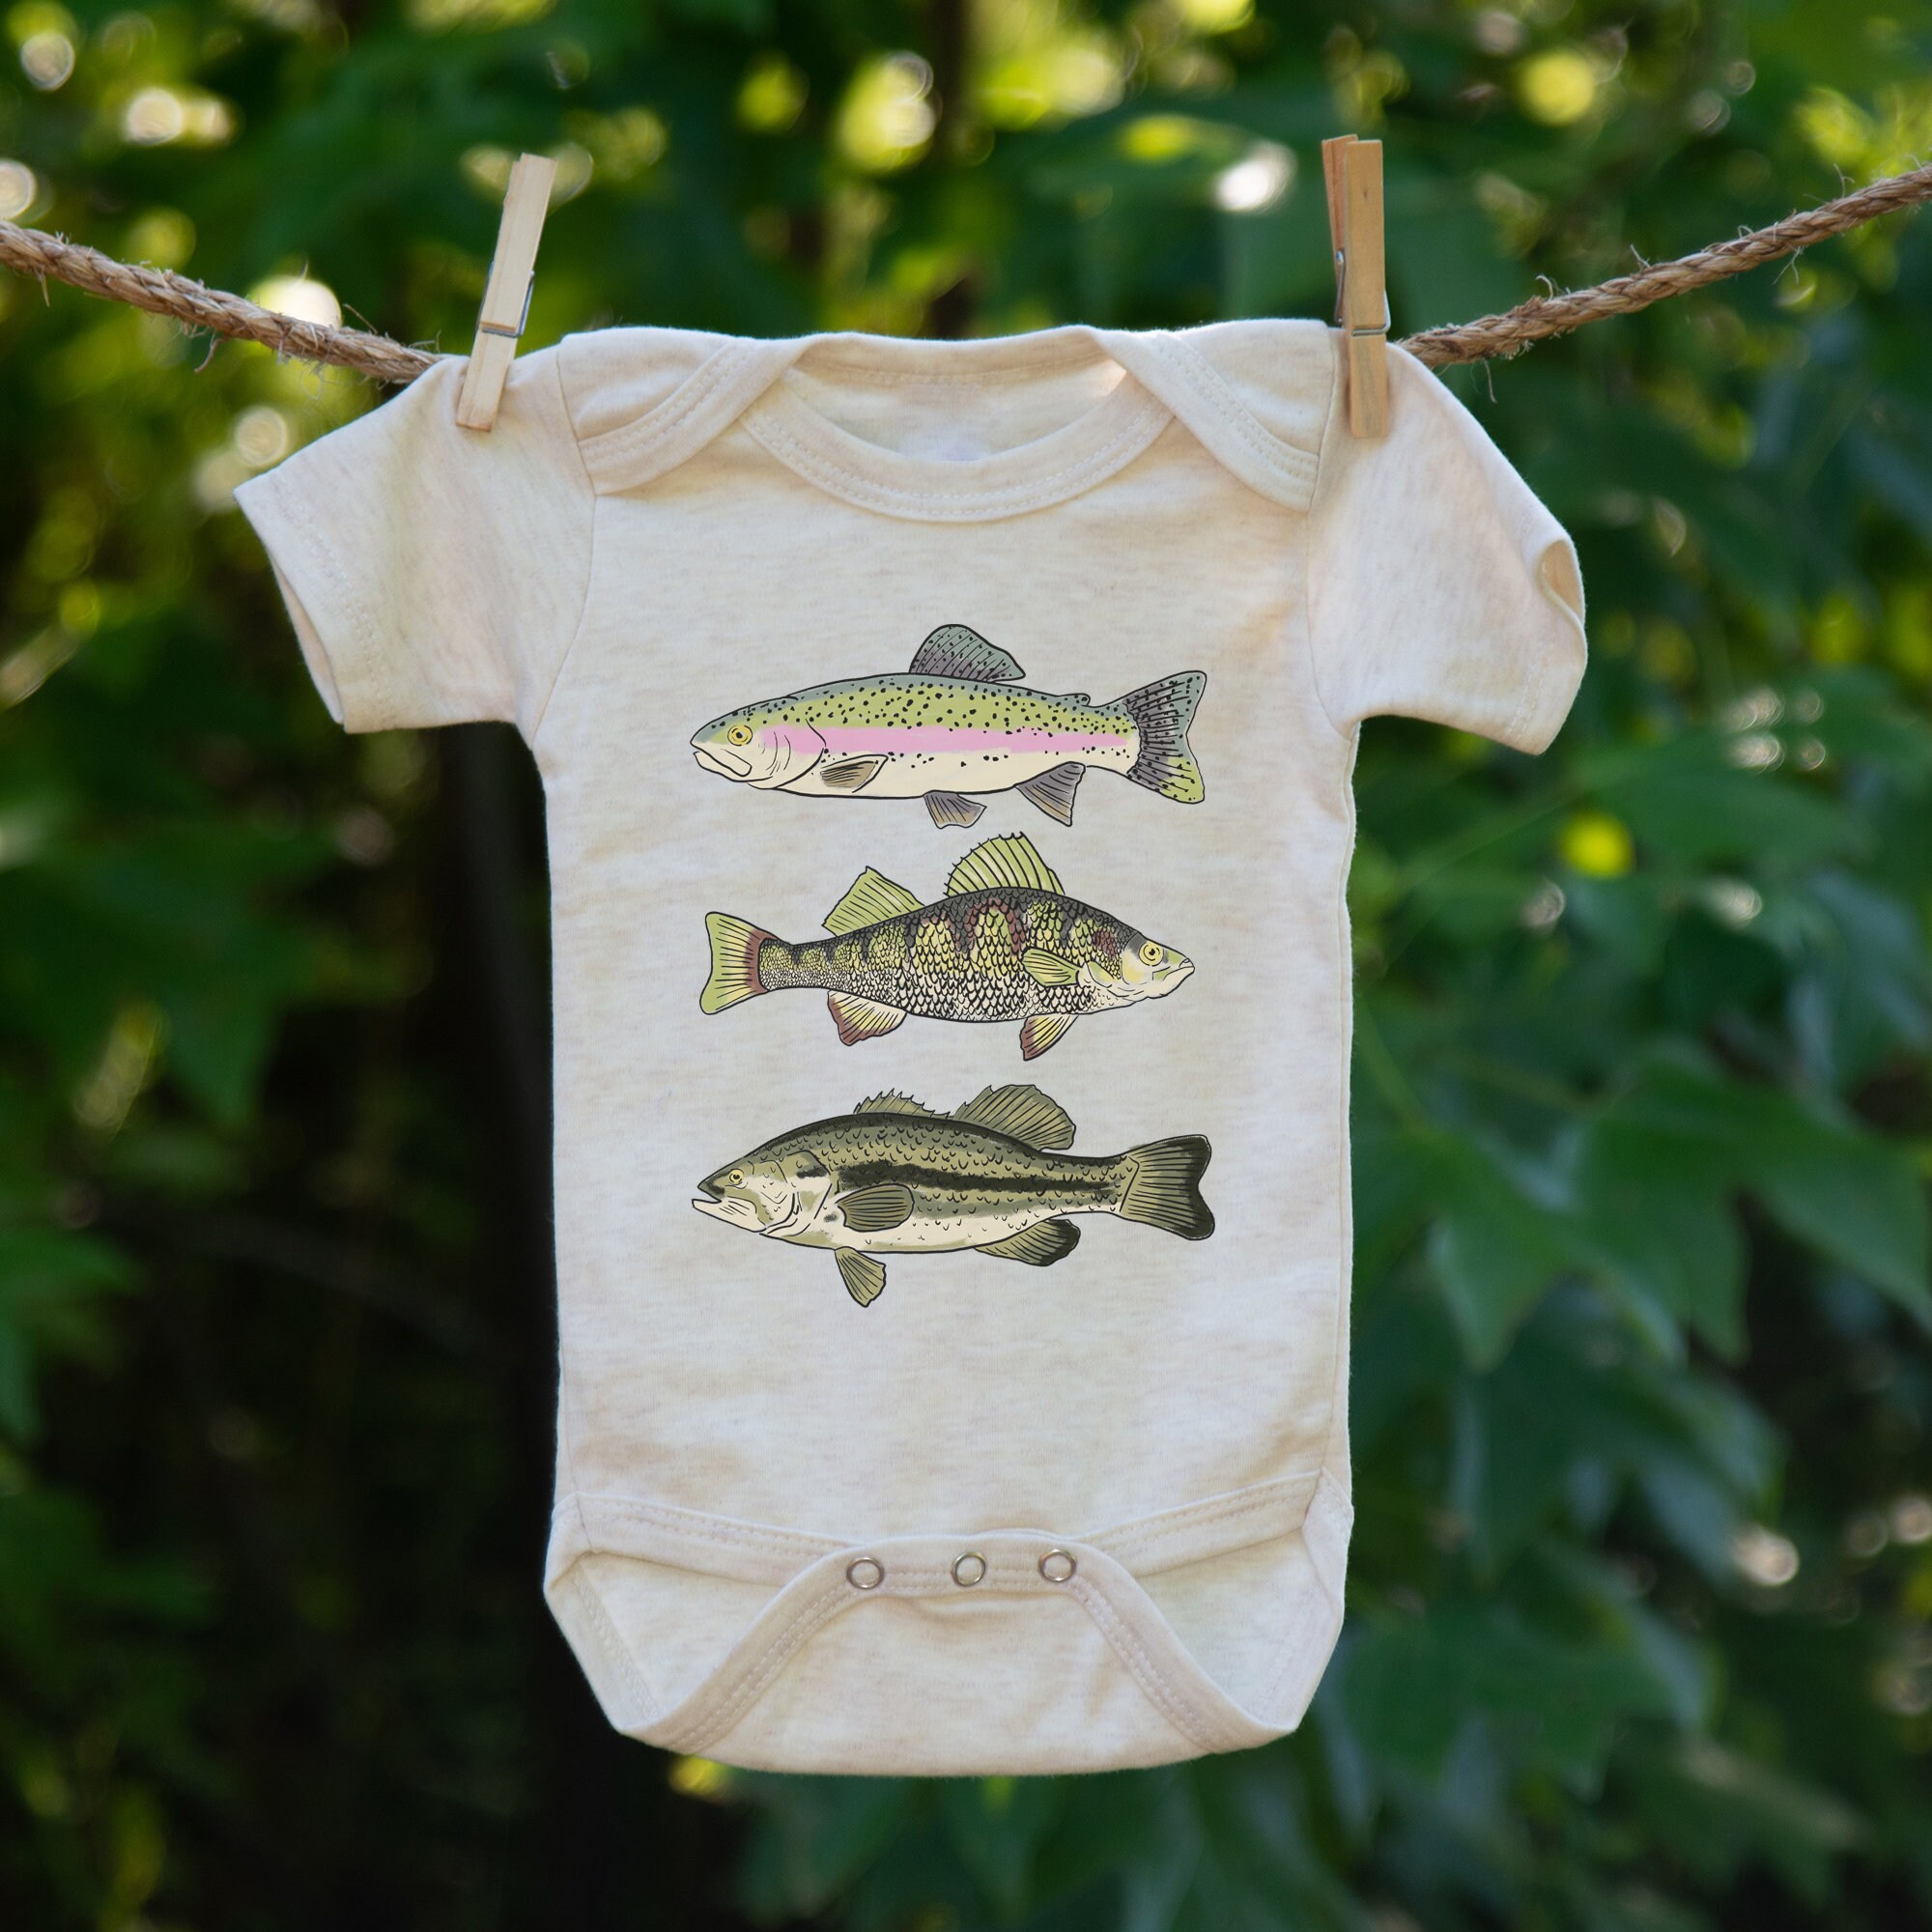 Three Fish Body Suit, Summer Fishing Outfit, Outdoor Summer Clothing, Baby Boy Fishing, Nature Baby Outfit, Baby Boy Gift, Fishing Baby Top